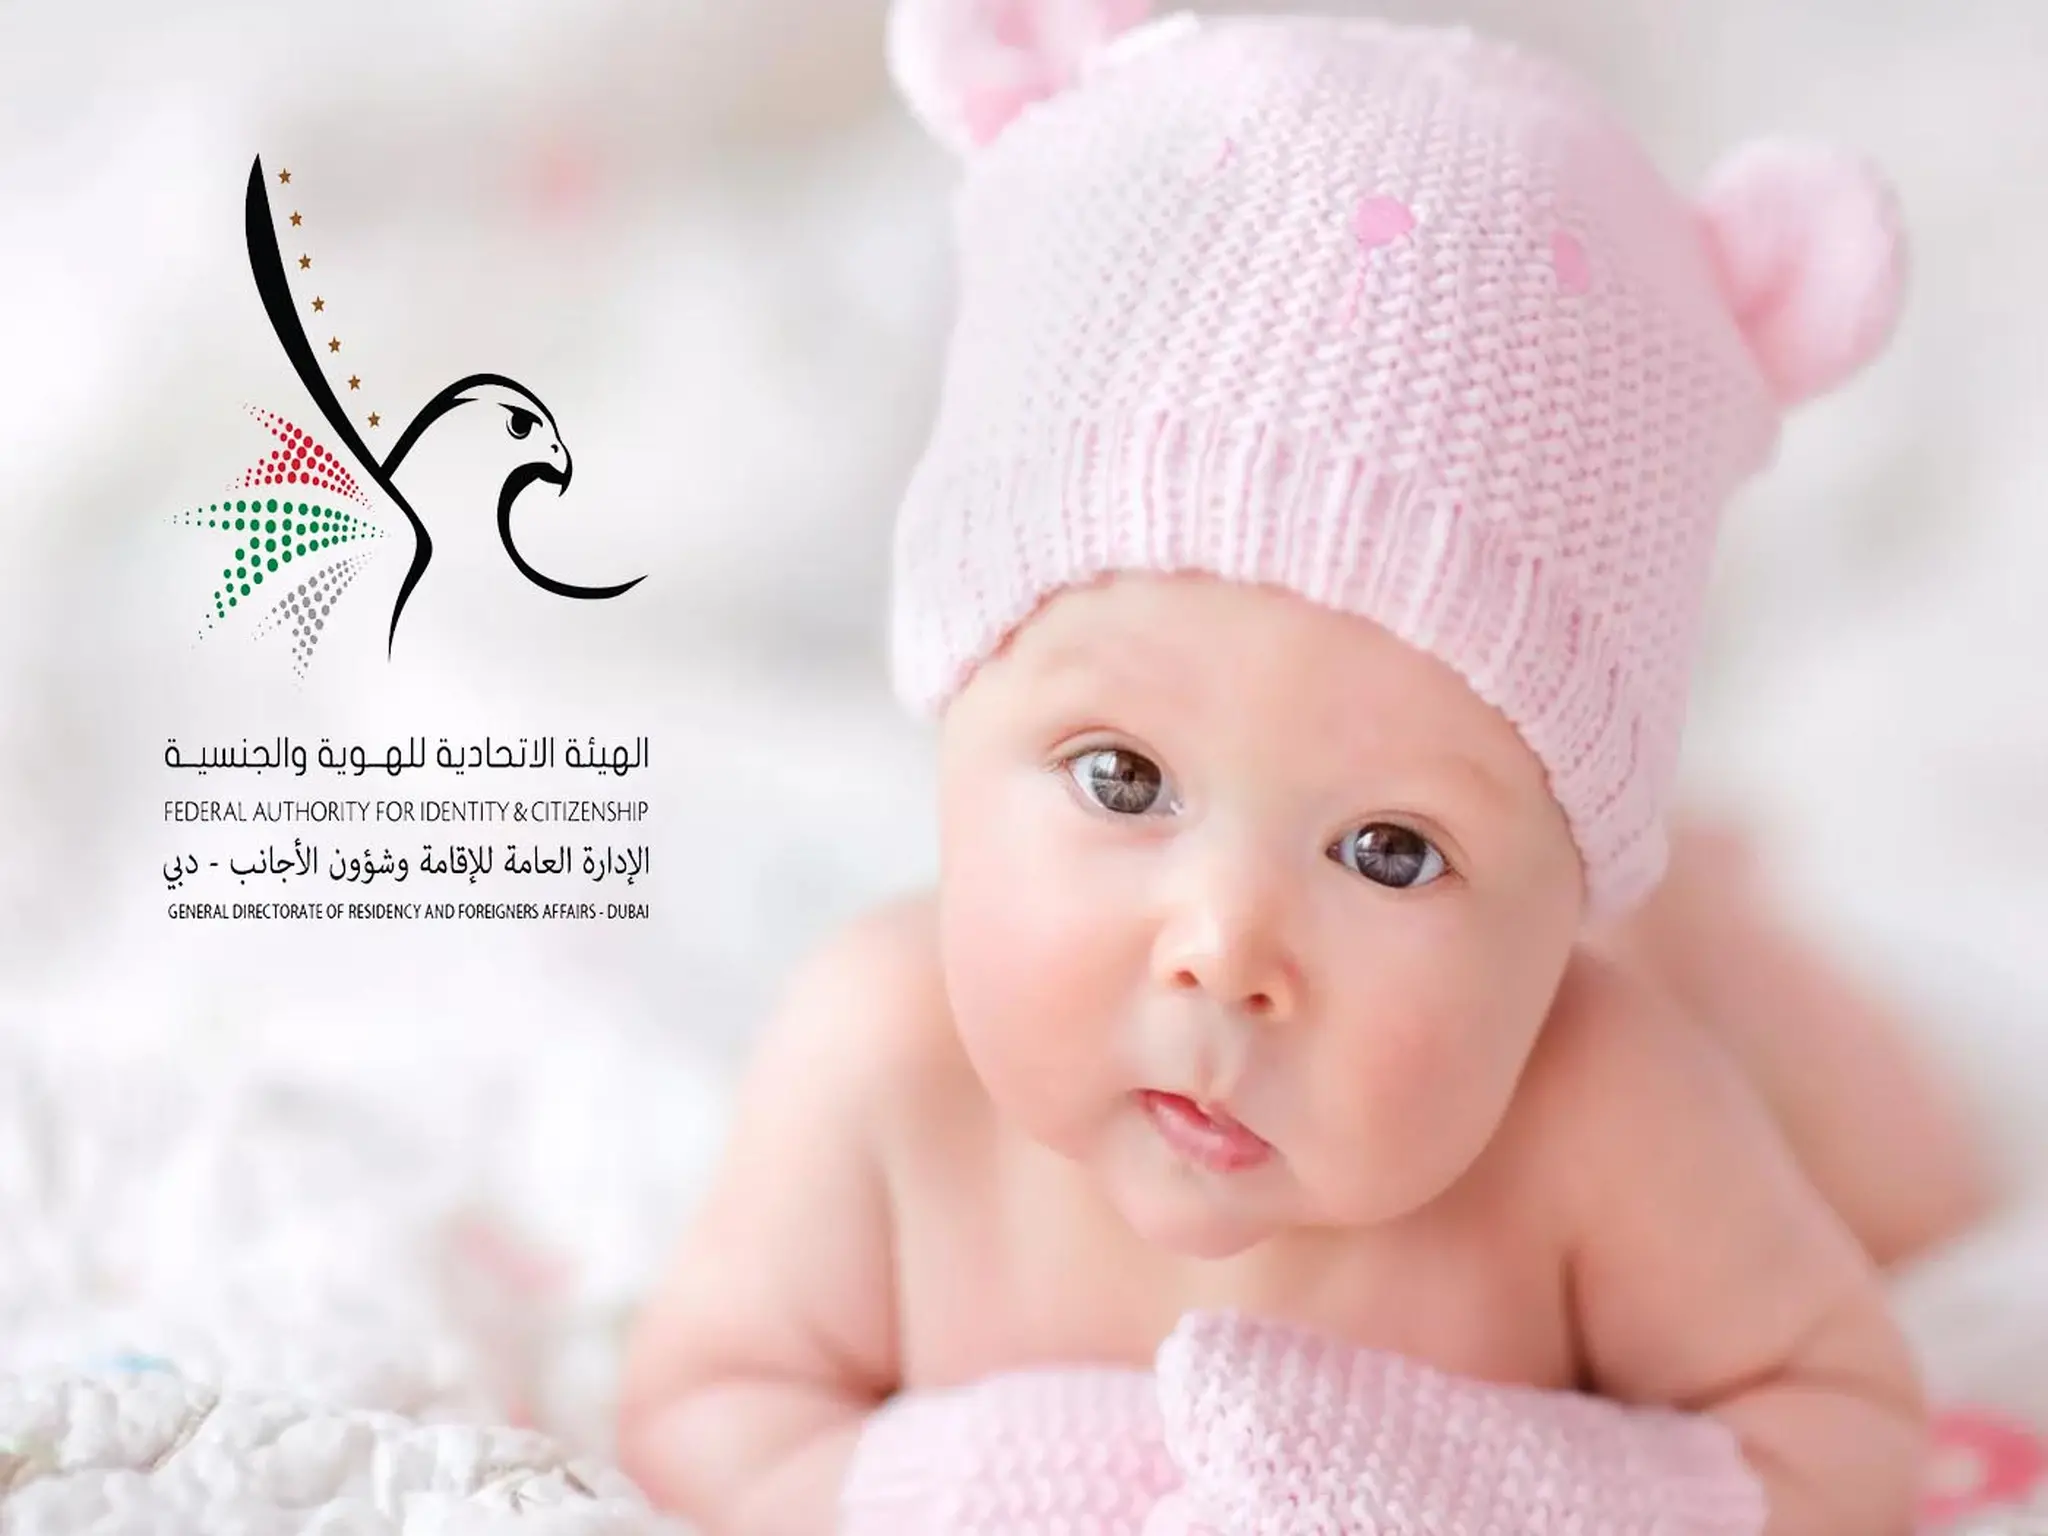 The UAE sets a value of 670 UAE dirhams for issuing a residency permit for a newborn